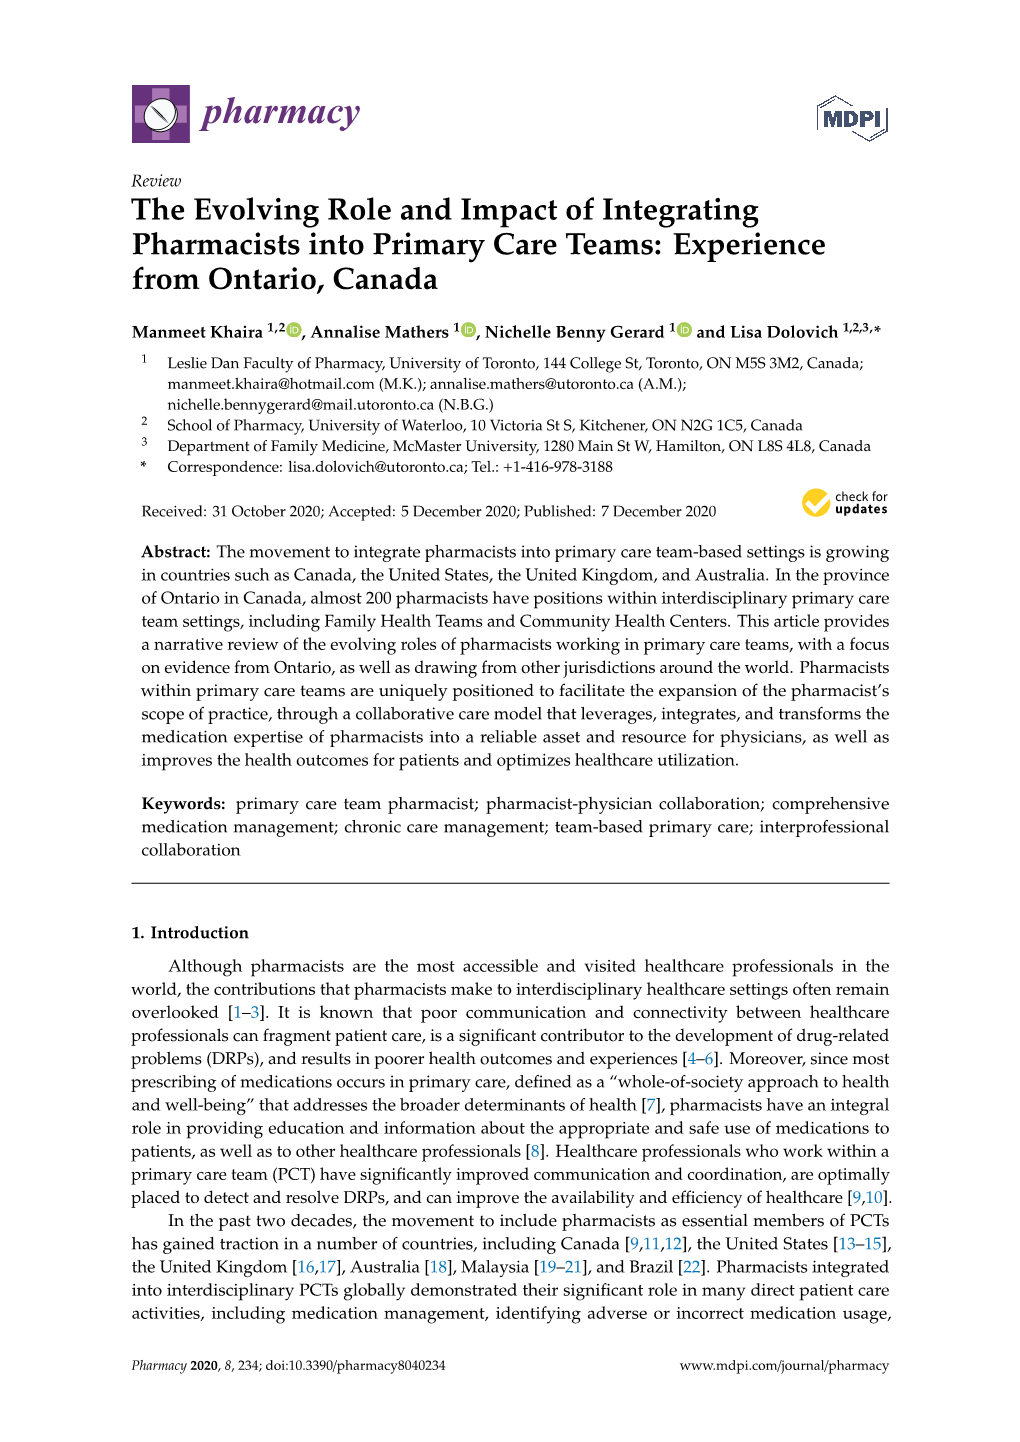 The Evolving Role and Impact of Integrating Pharmacists Into Primary Care Teams: Experience from Ontario, Canada